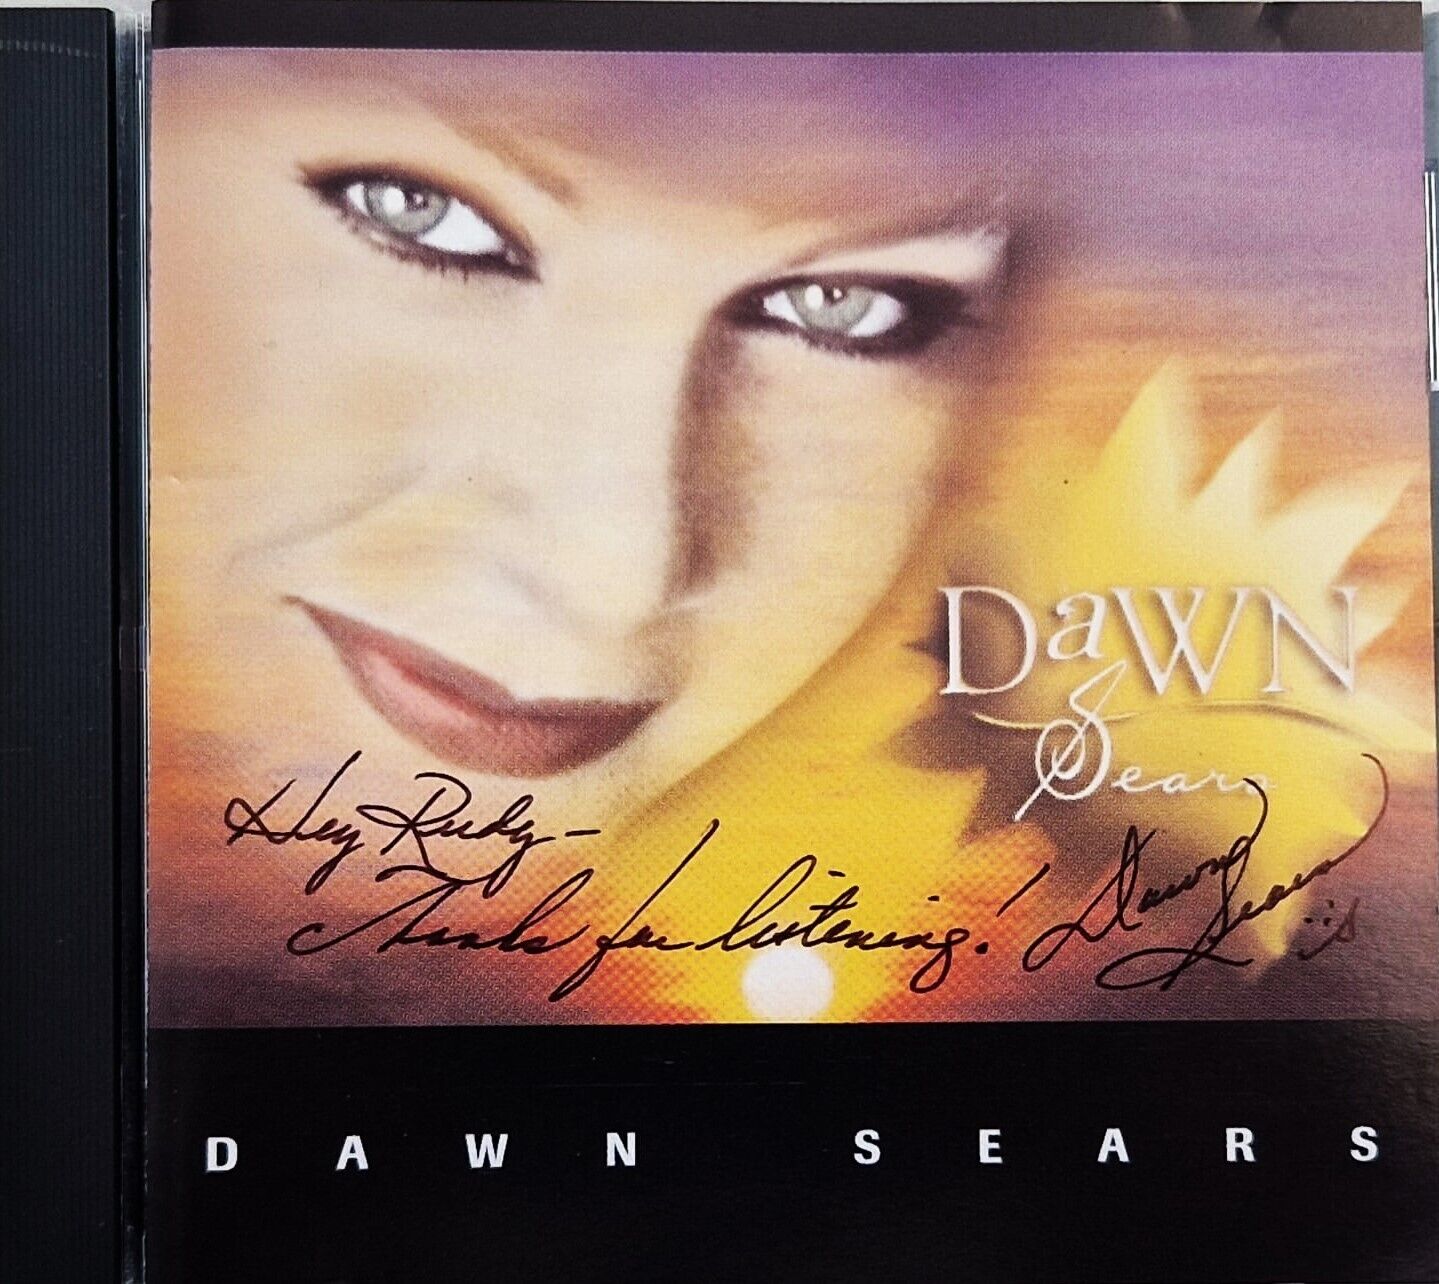 autographed, signet on front inlay Dawn Sears ‎– Dawn Sears 2002 CD album